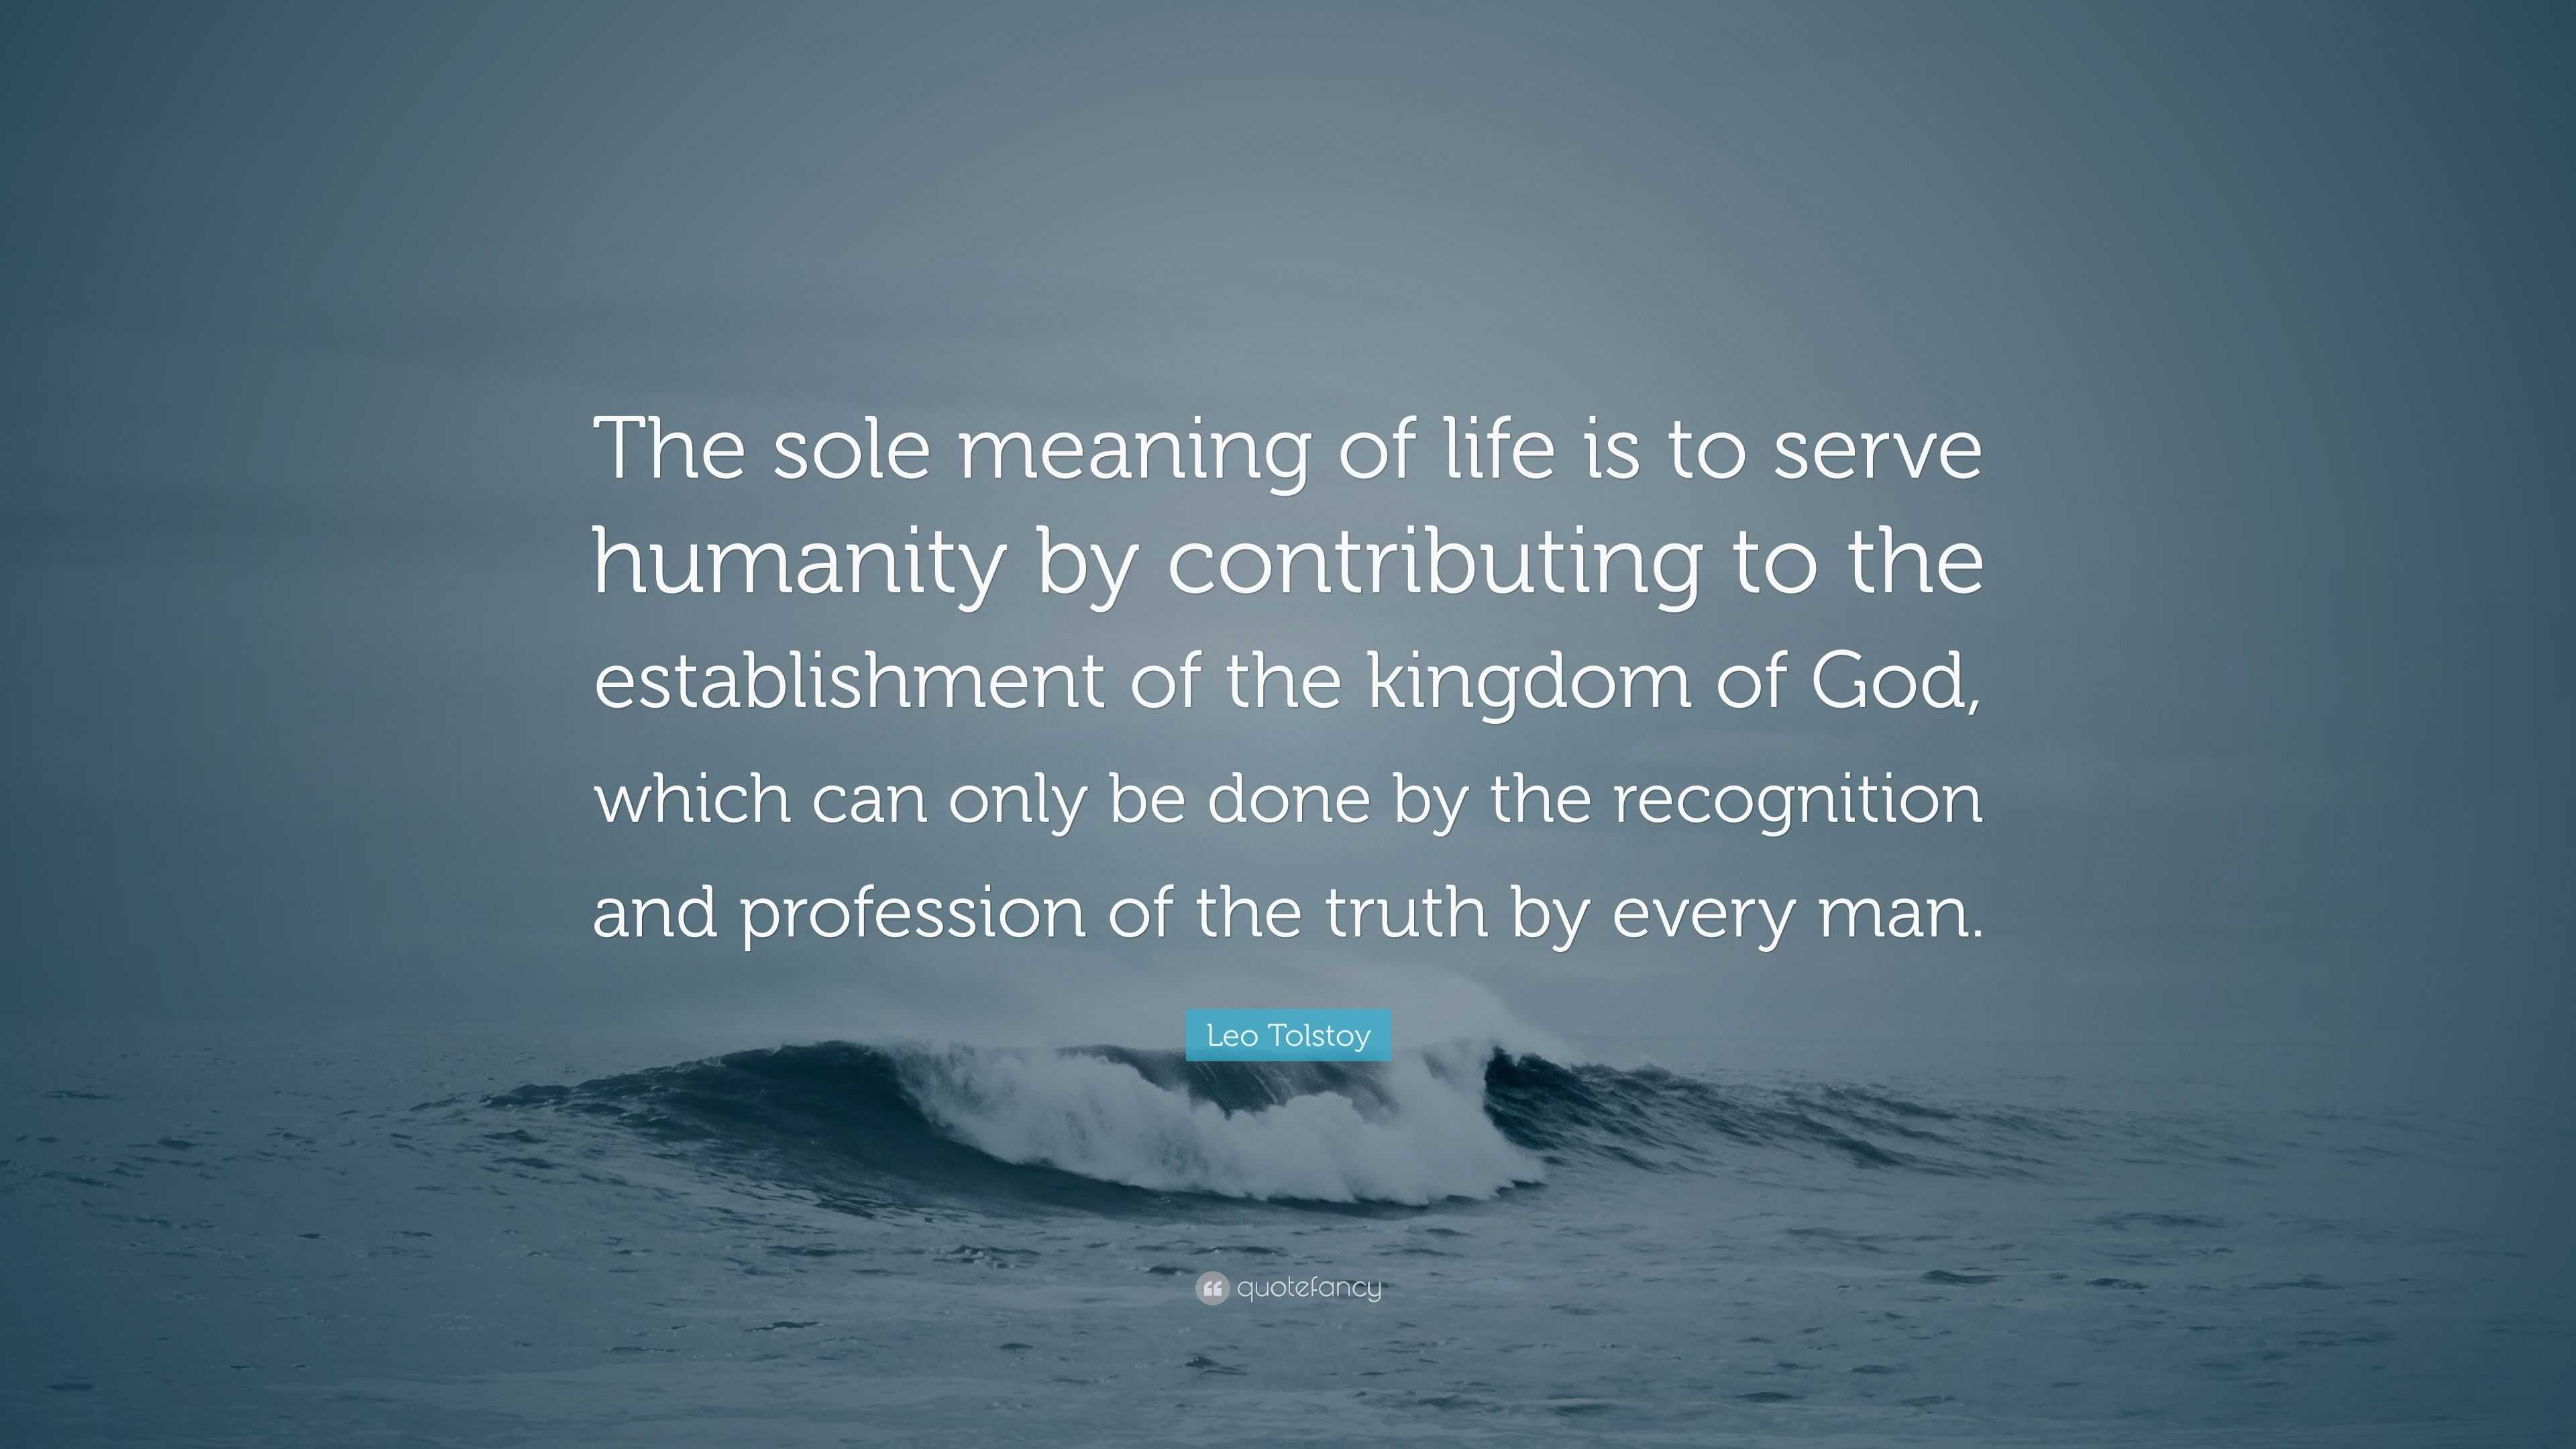 Leo Tolstoy Quote The Sole Meaning Of Life Is To Serve Humanity By Contributing To The Establishment Of The Kingdom Of God Which Can Only